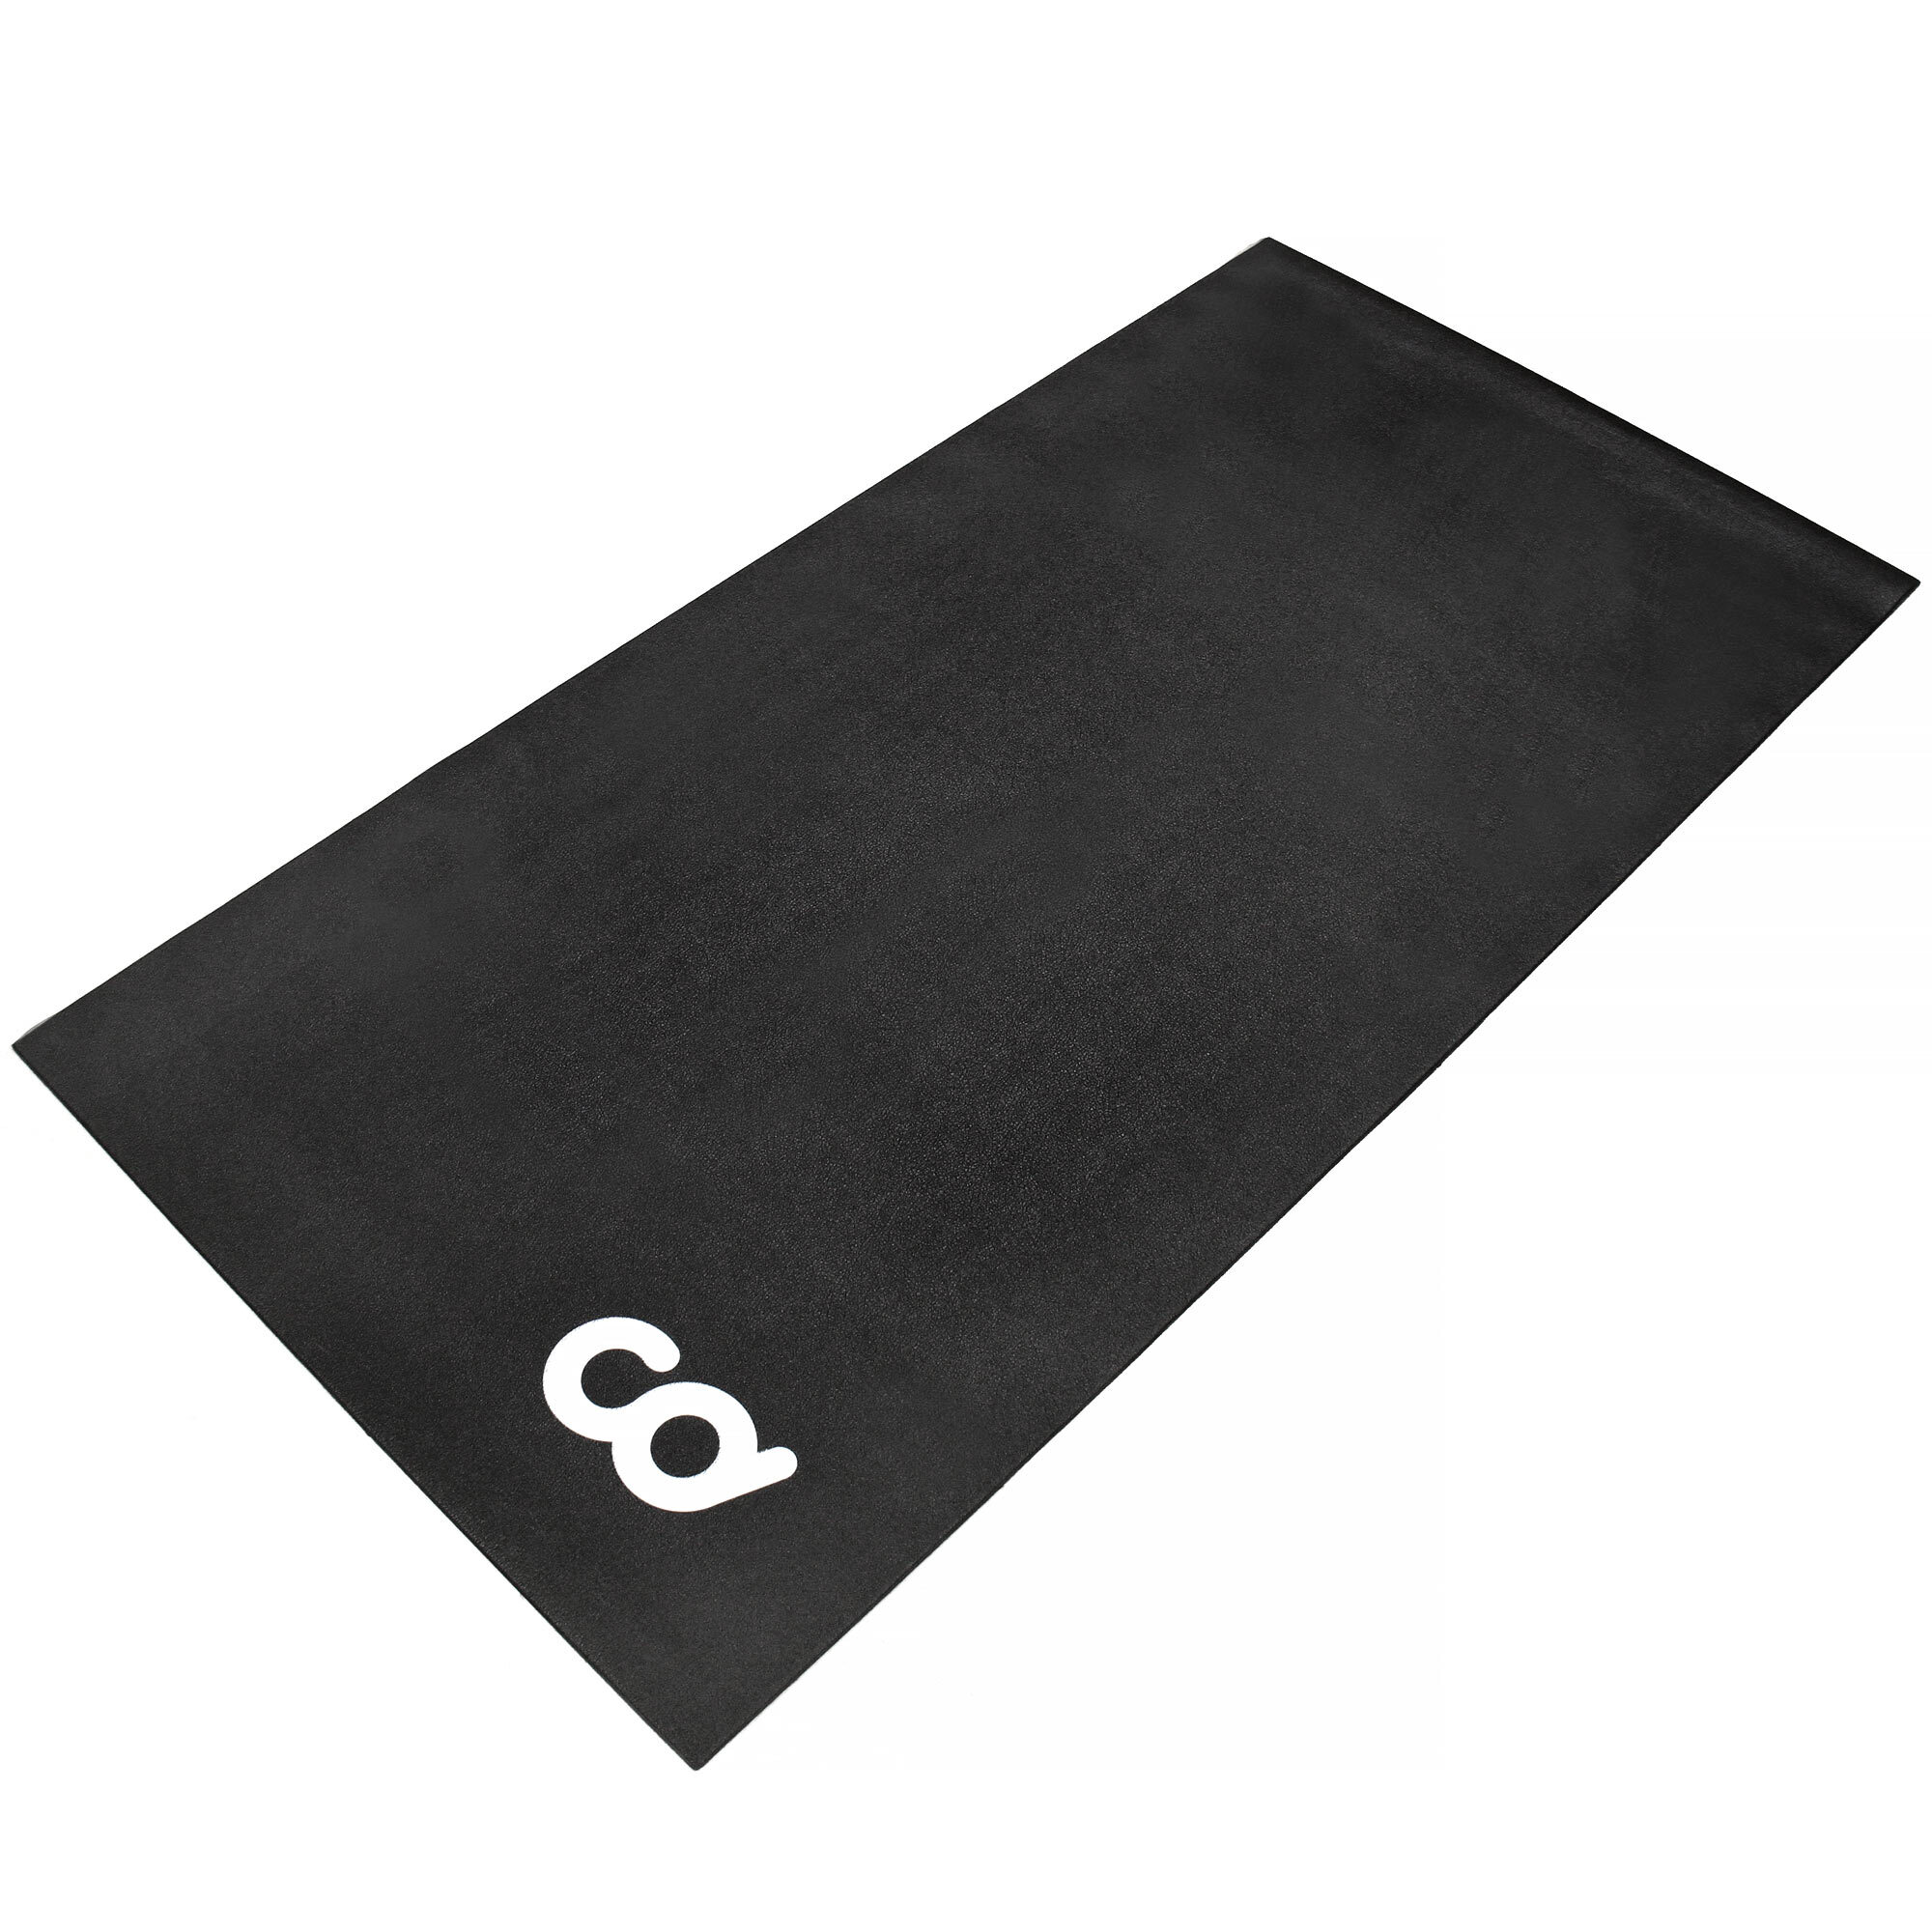 Bicycle Trainer Spin Bike Floor Mat Indoor Cycle Exercise Equipment Gym Flooring 30" x 72" Soft